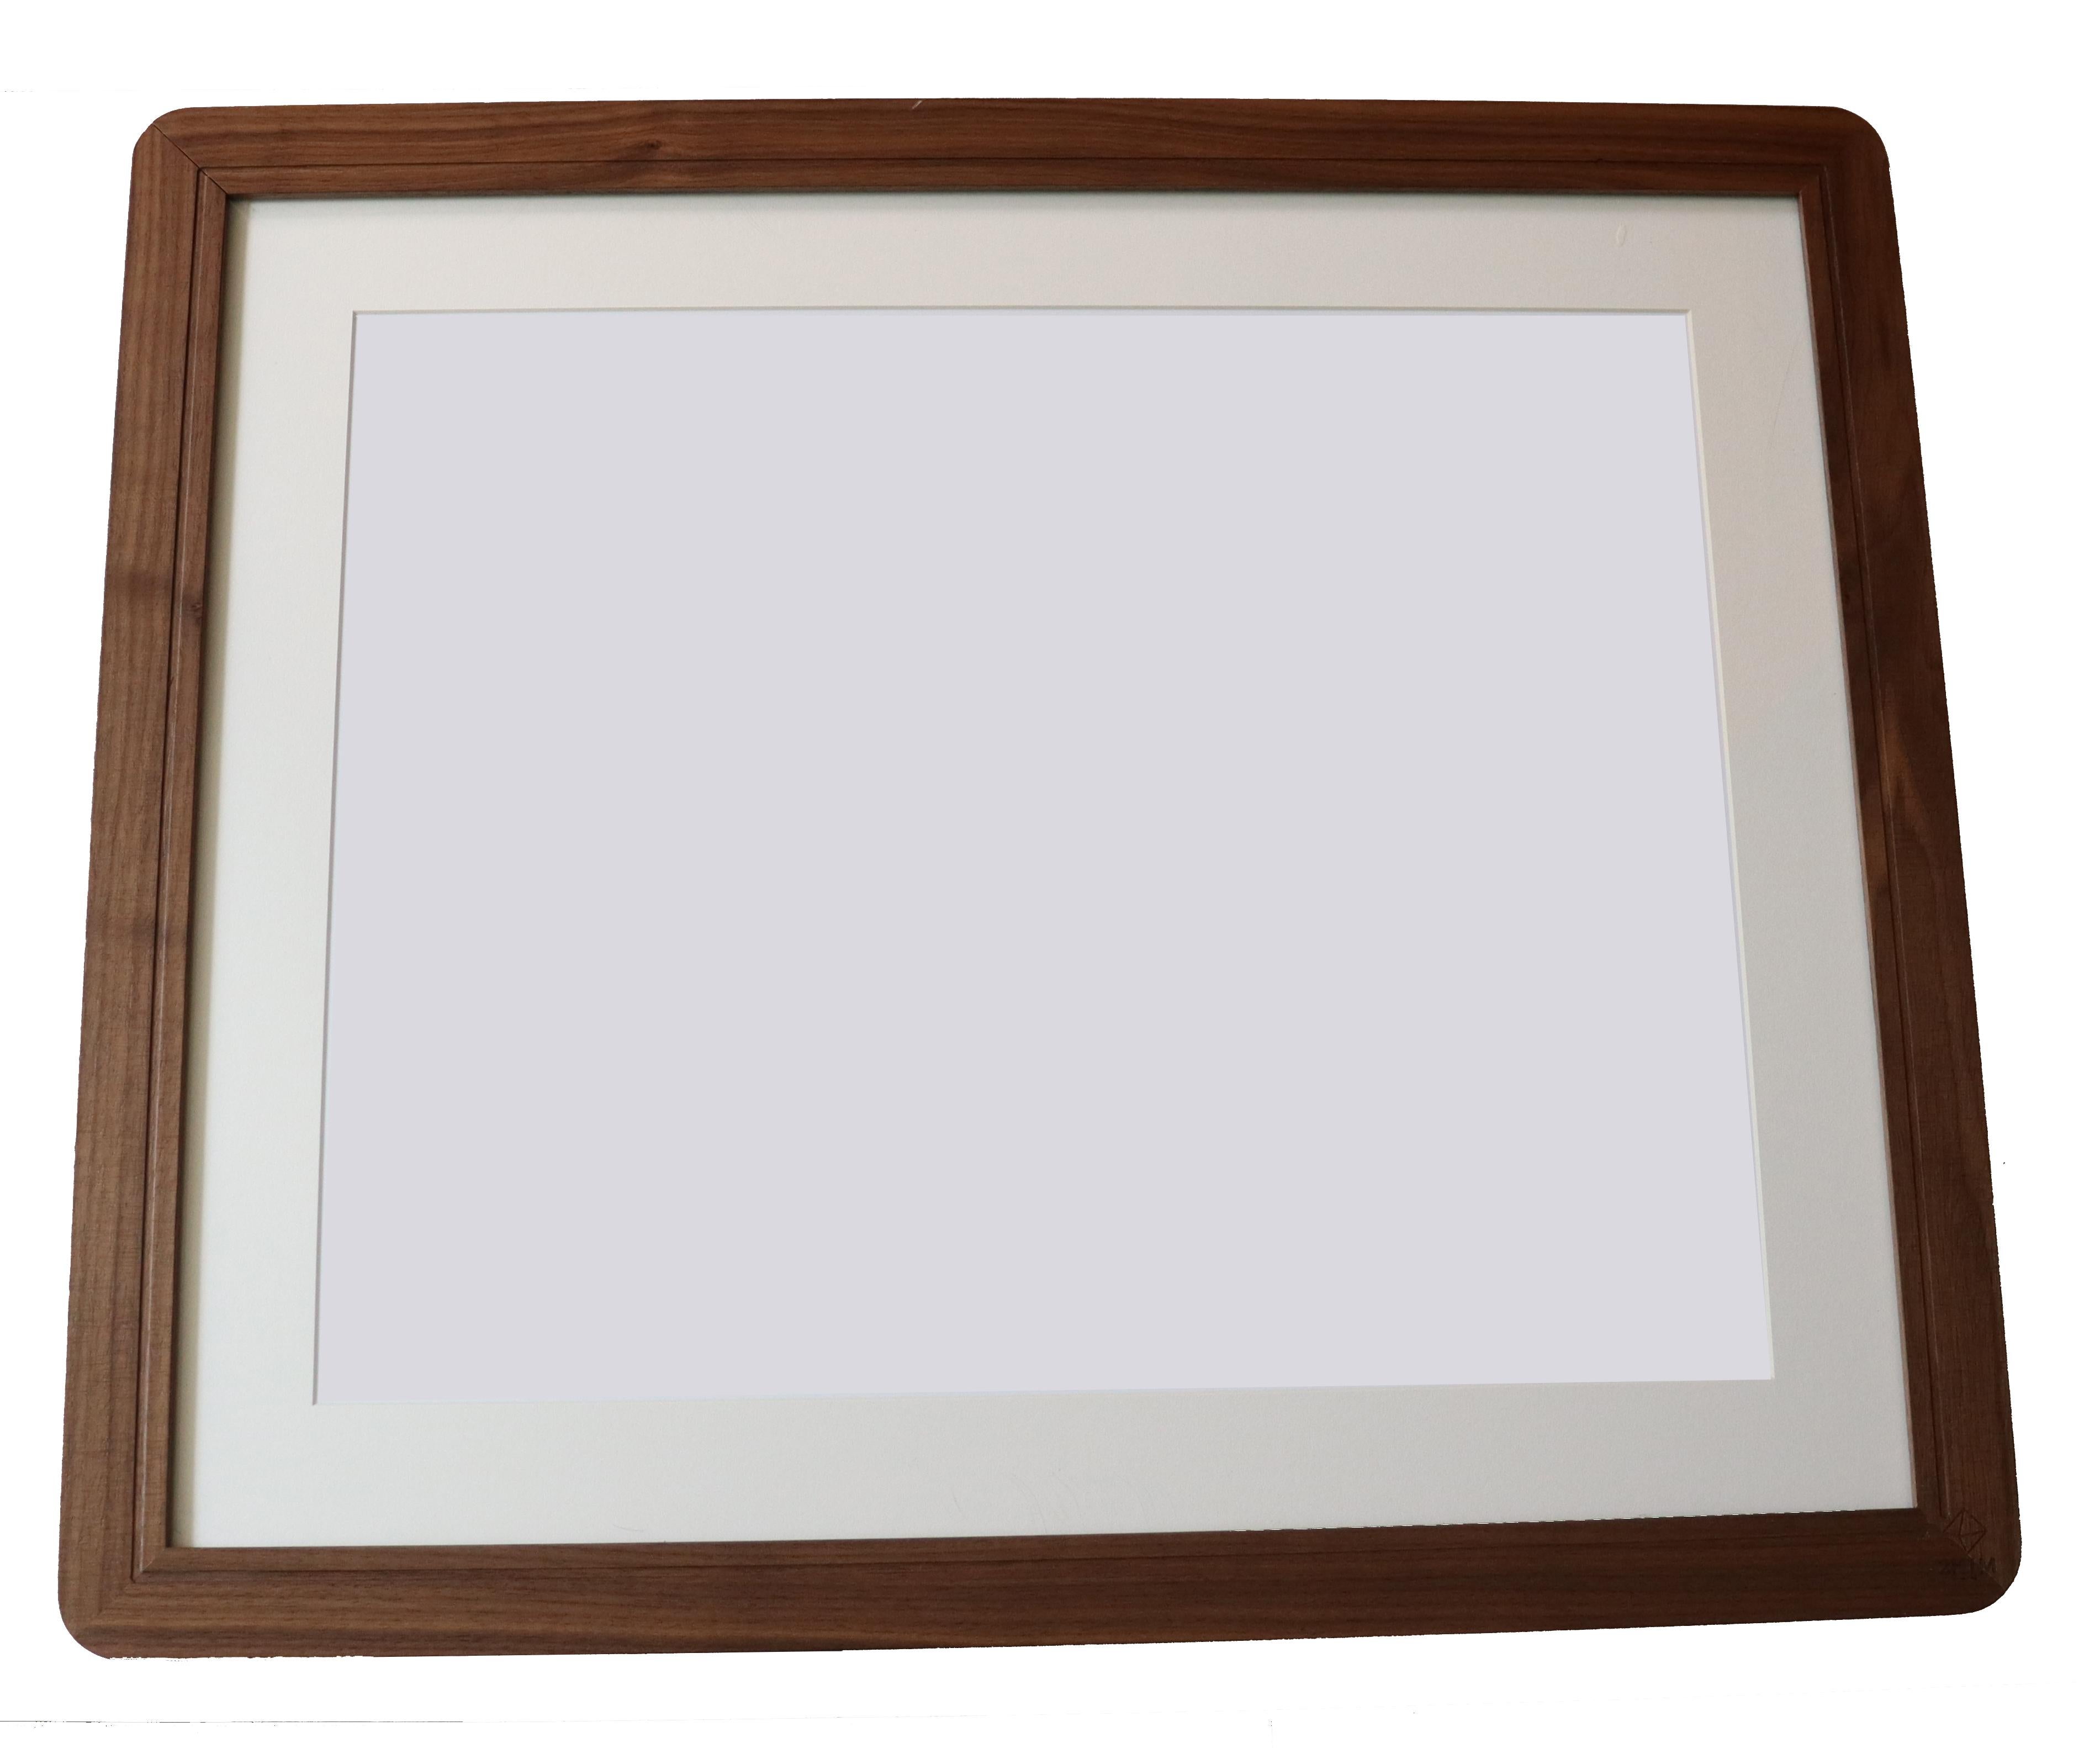 Woodwork Four Used Solid Wood Picture Frames Contemporary Walnut Made in Italy, Auction For Sale